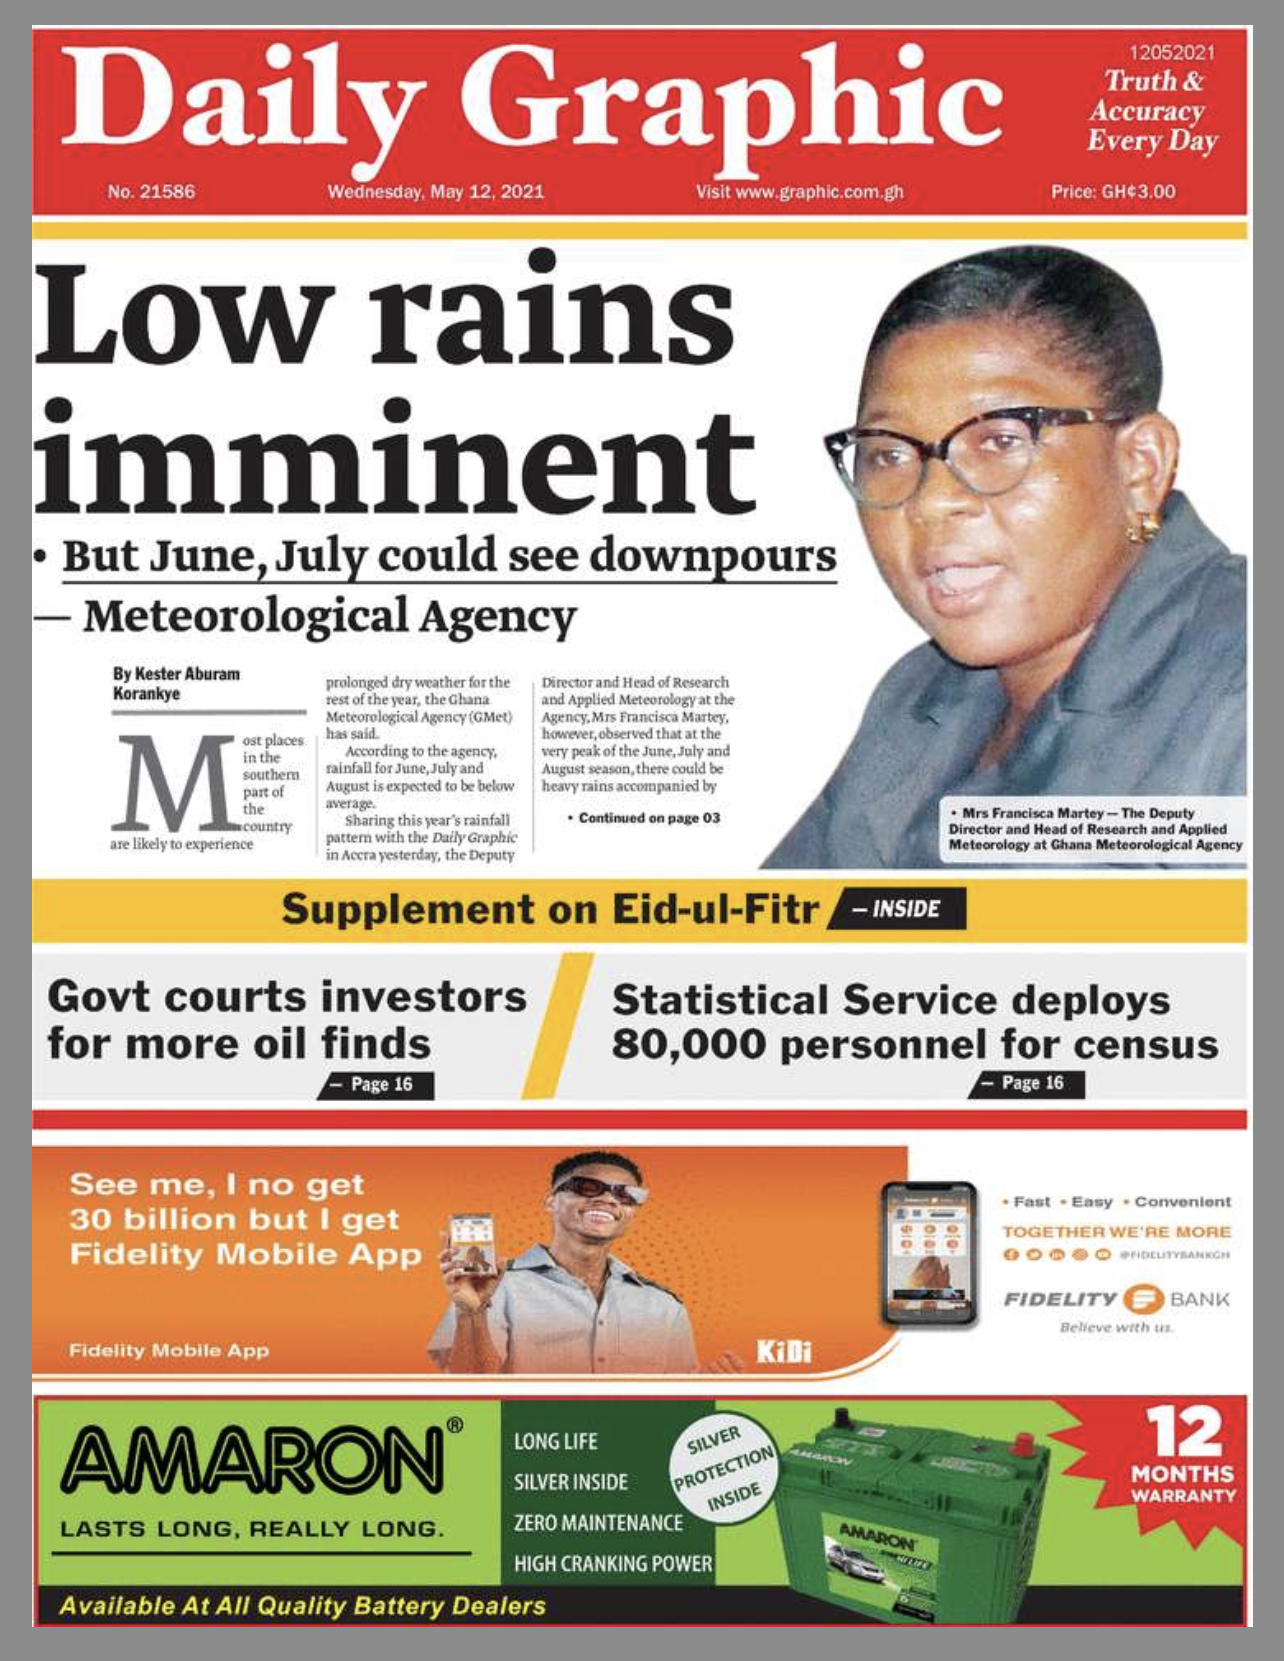 Daily Graphic May 12, 2021 front page 